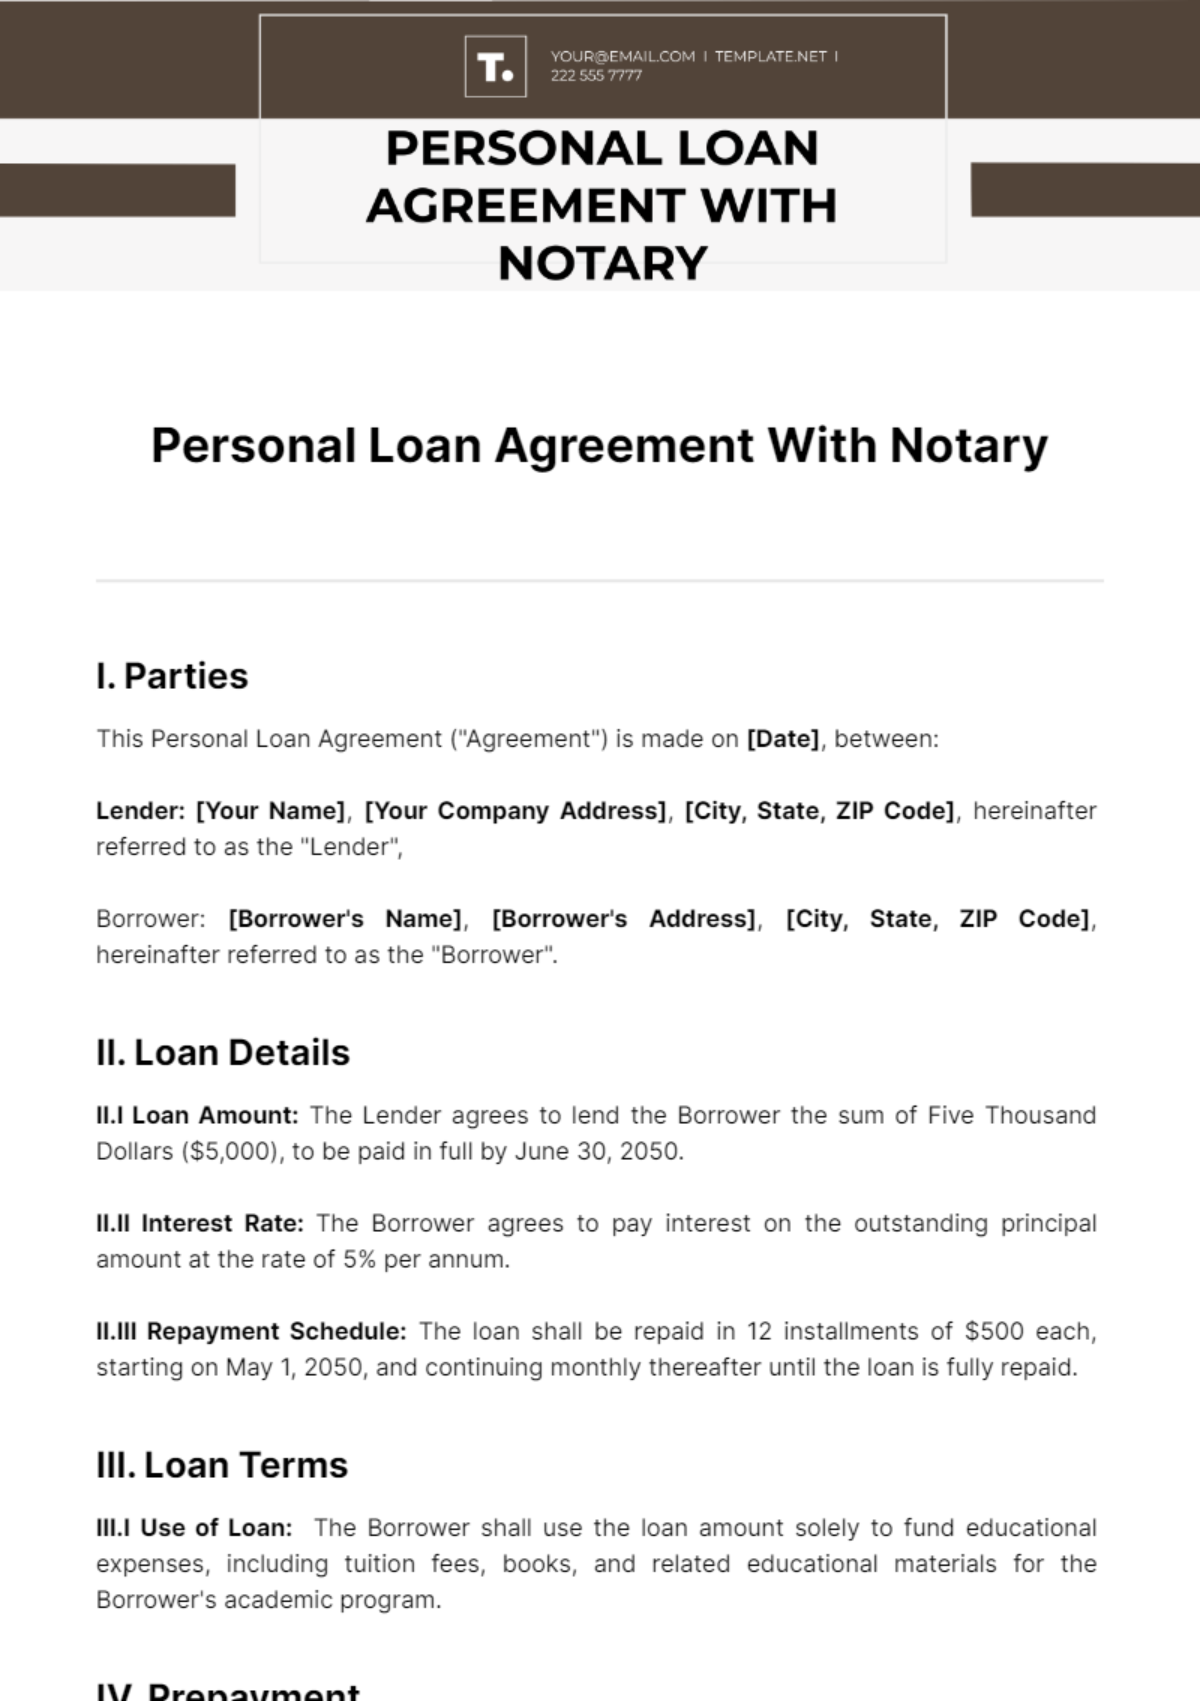 Personal Loan Agreement With Notary Template